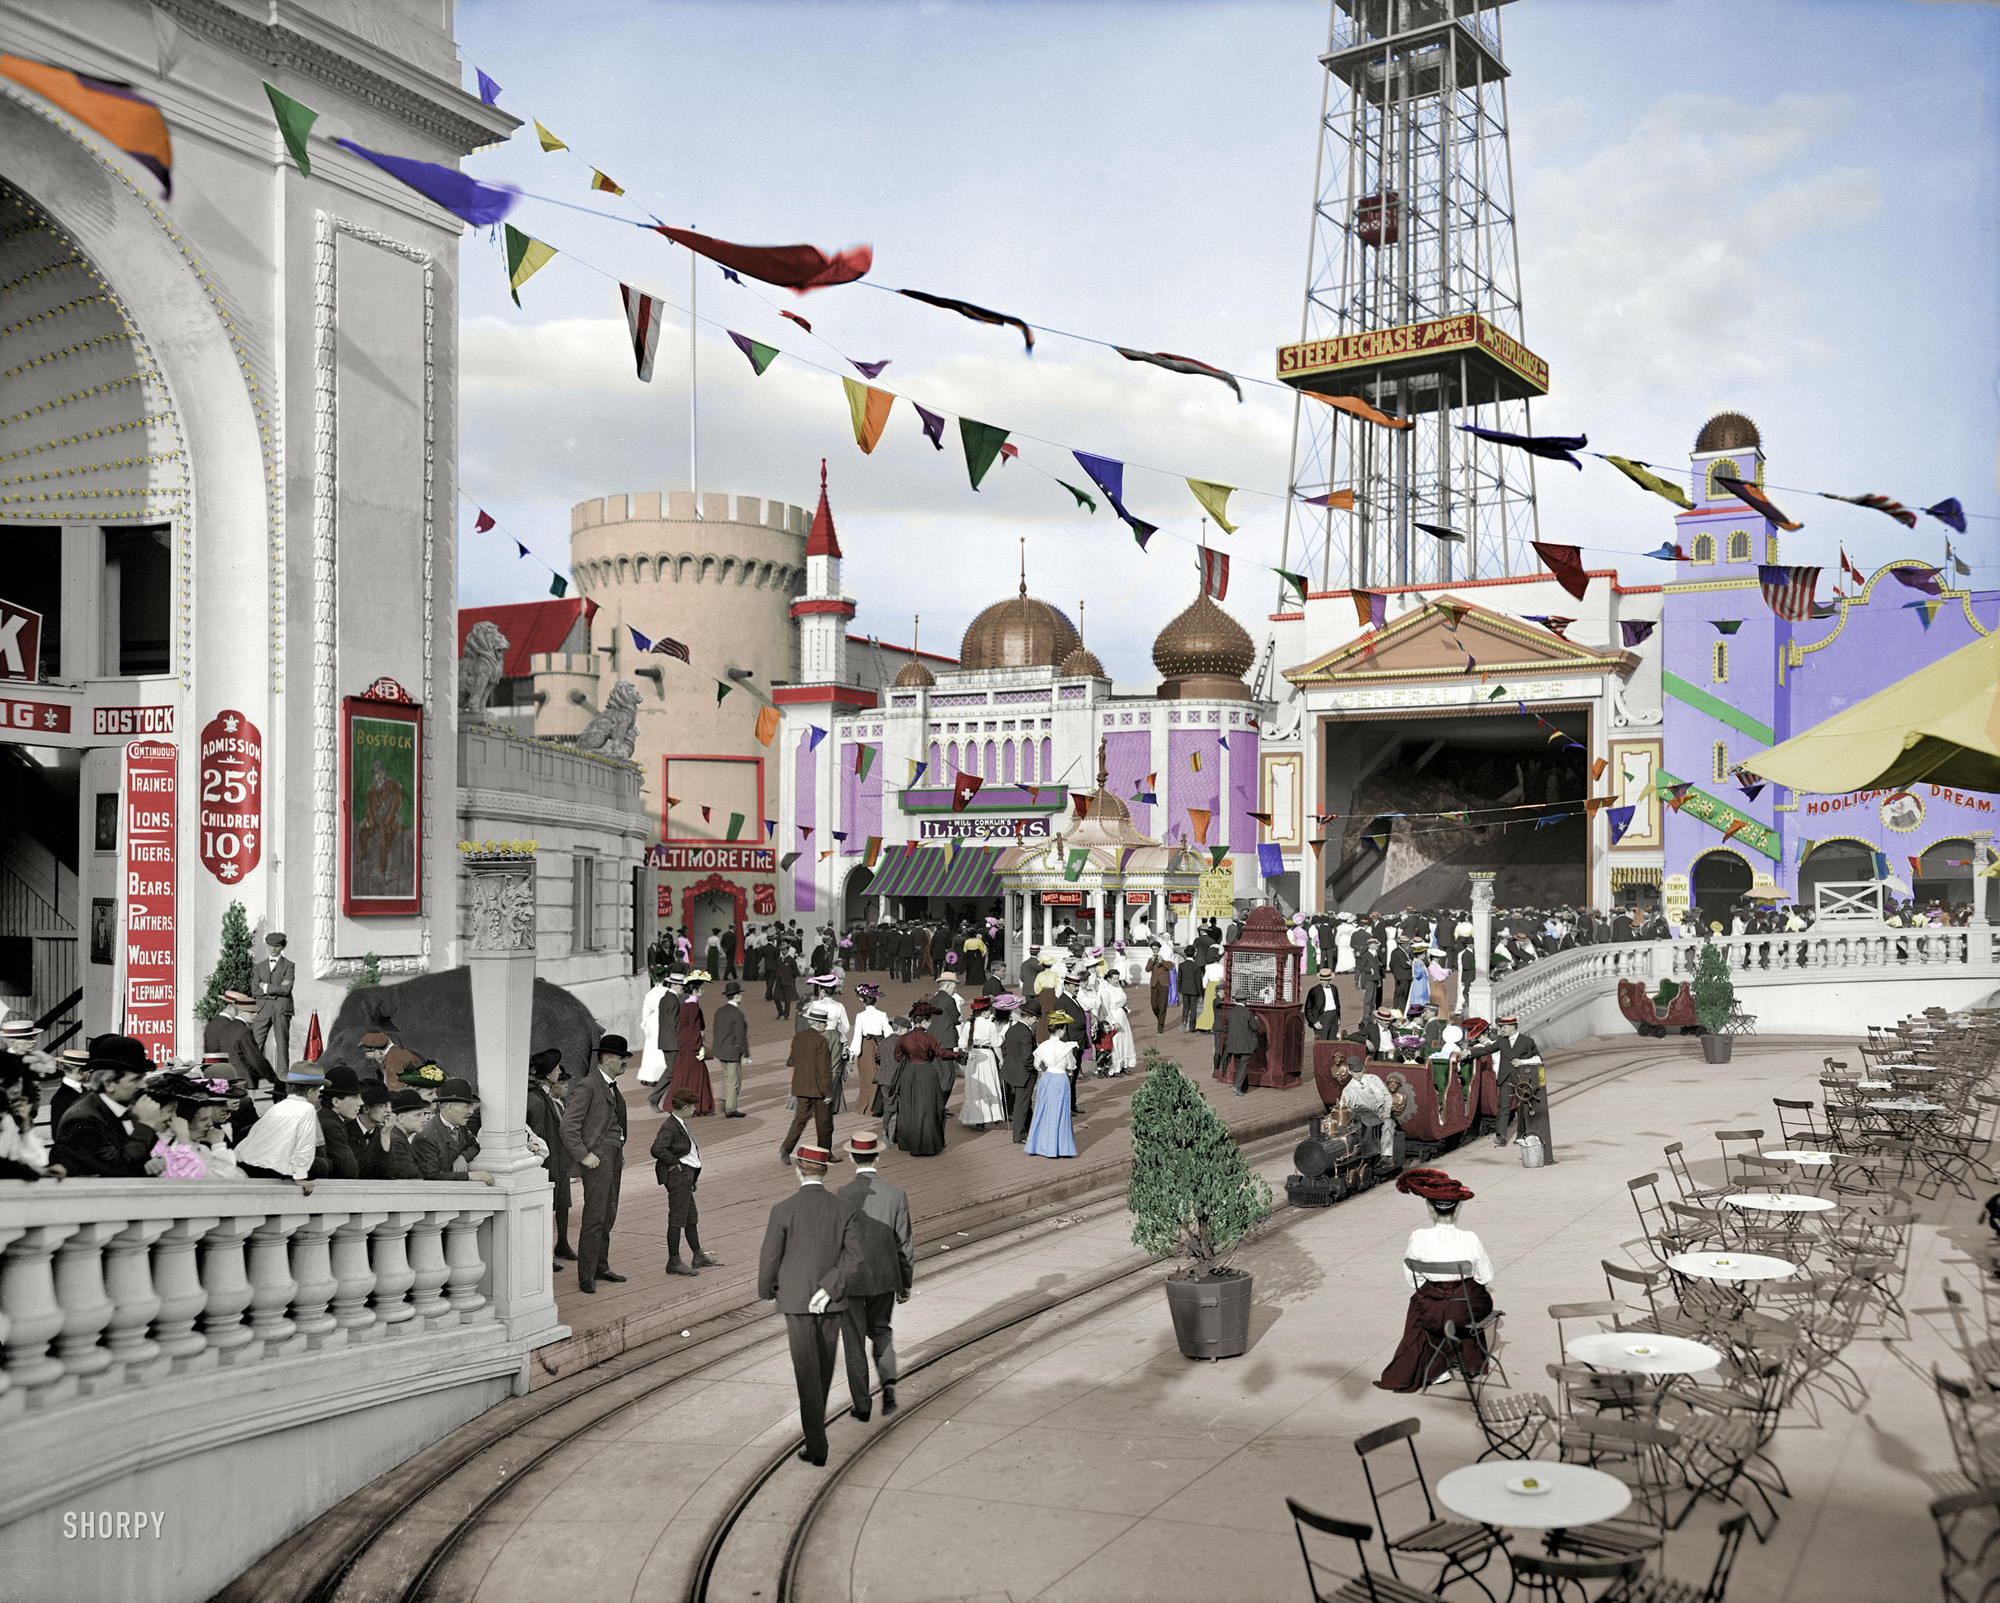 I saw this photo on your site a while back.  I like the detail of the image, so when I started messing around with an image editor, I decided I would like to try to color it.  I looked up colored postcards of Luna Park, only to discover that this was Dreamland Amusement Park and it had burned to the ground 7 years after it was opened.  Its design and decor was also panned in the press as being mostly white and drab, so I held back adding too much color to the buildings, but brightened it up as much as I could.  Even the postcards show most everything is white. View full size.